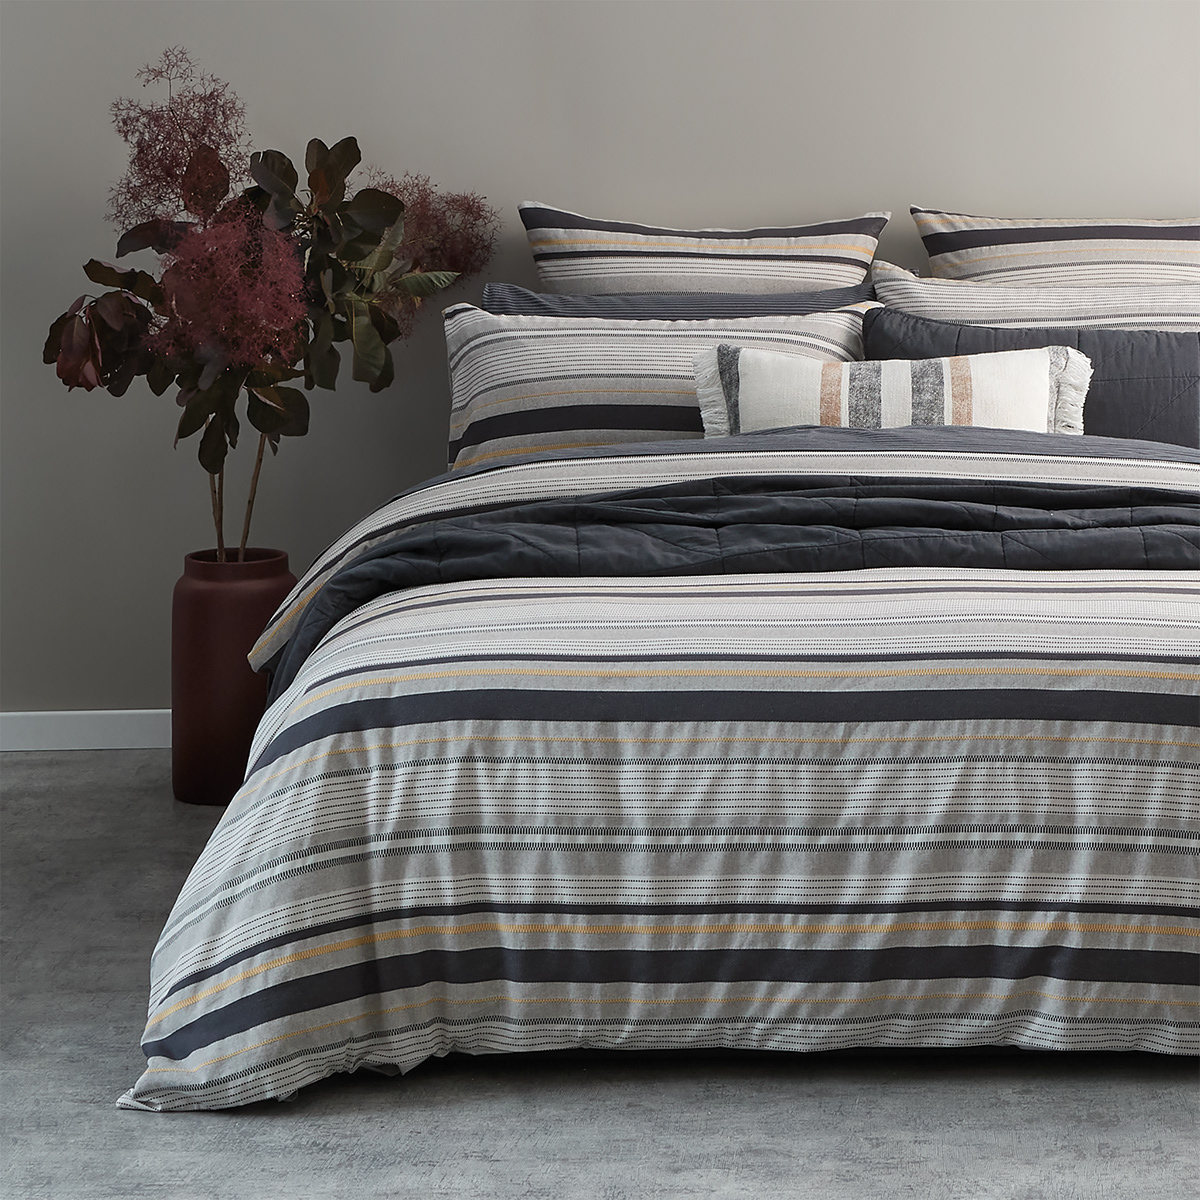 bed linen design with woven stripes